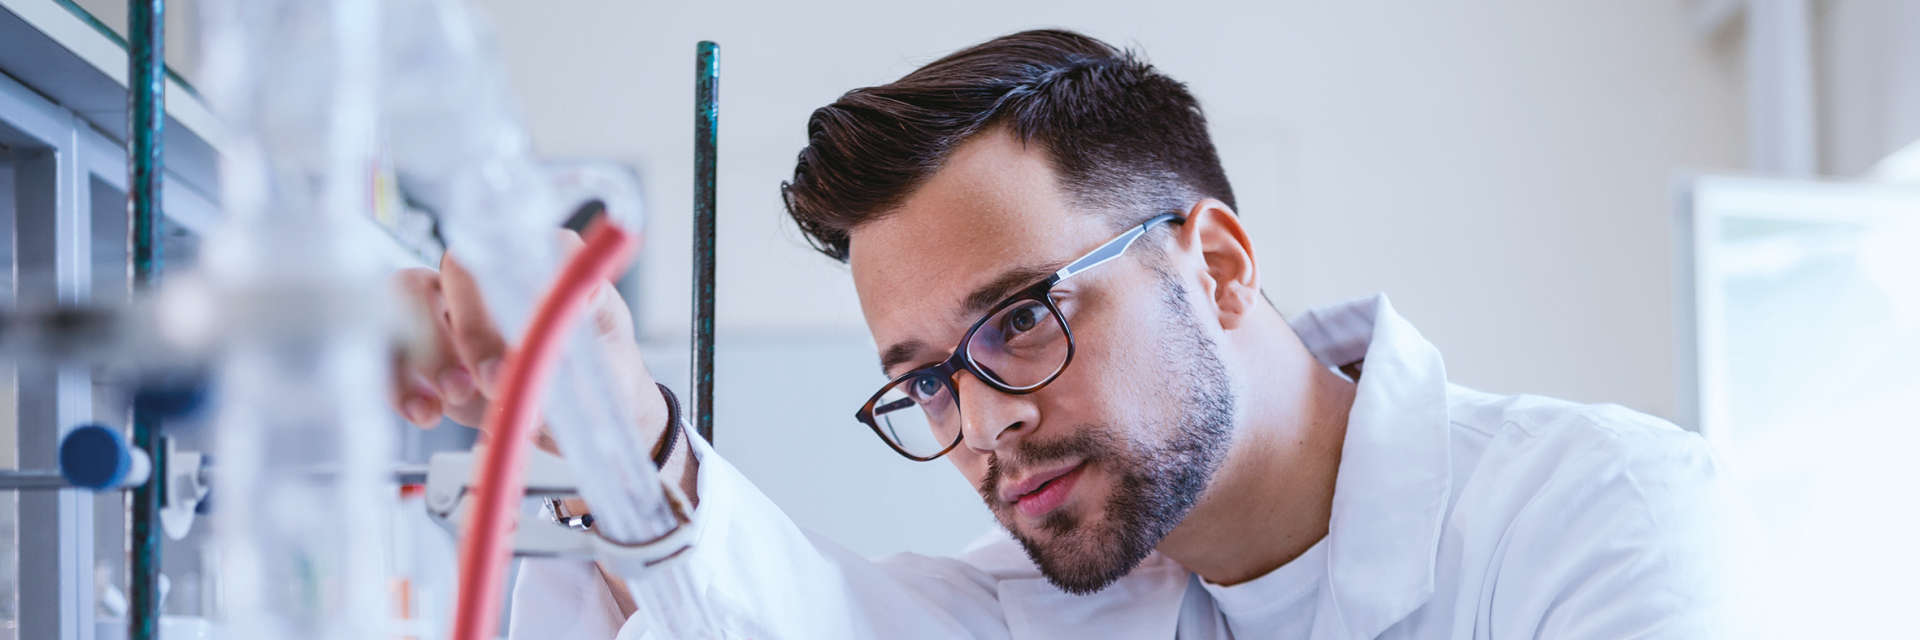 Enzymes, NGS, Male Caucasian scientist working with scientific equipment in a laboratory setting